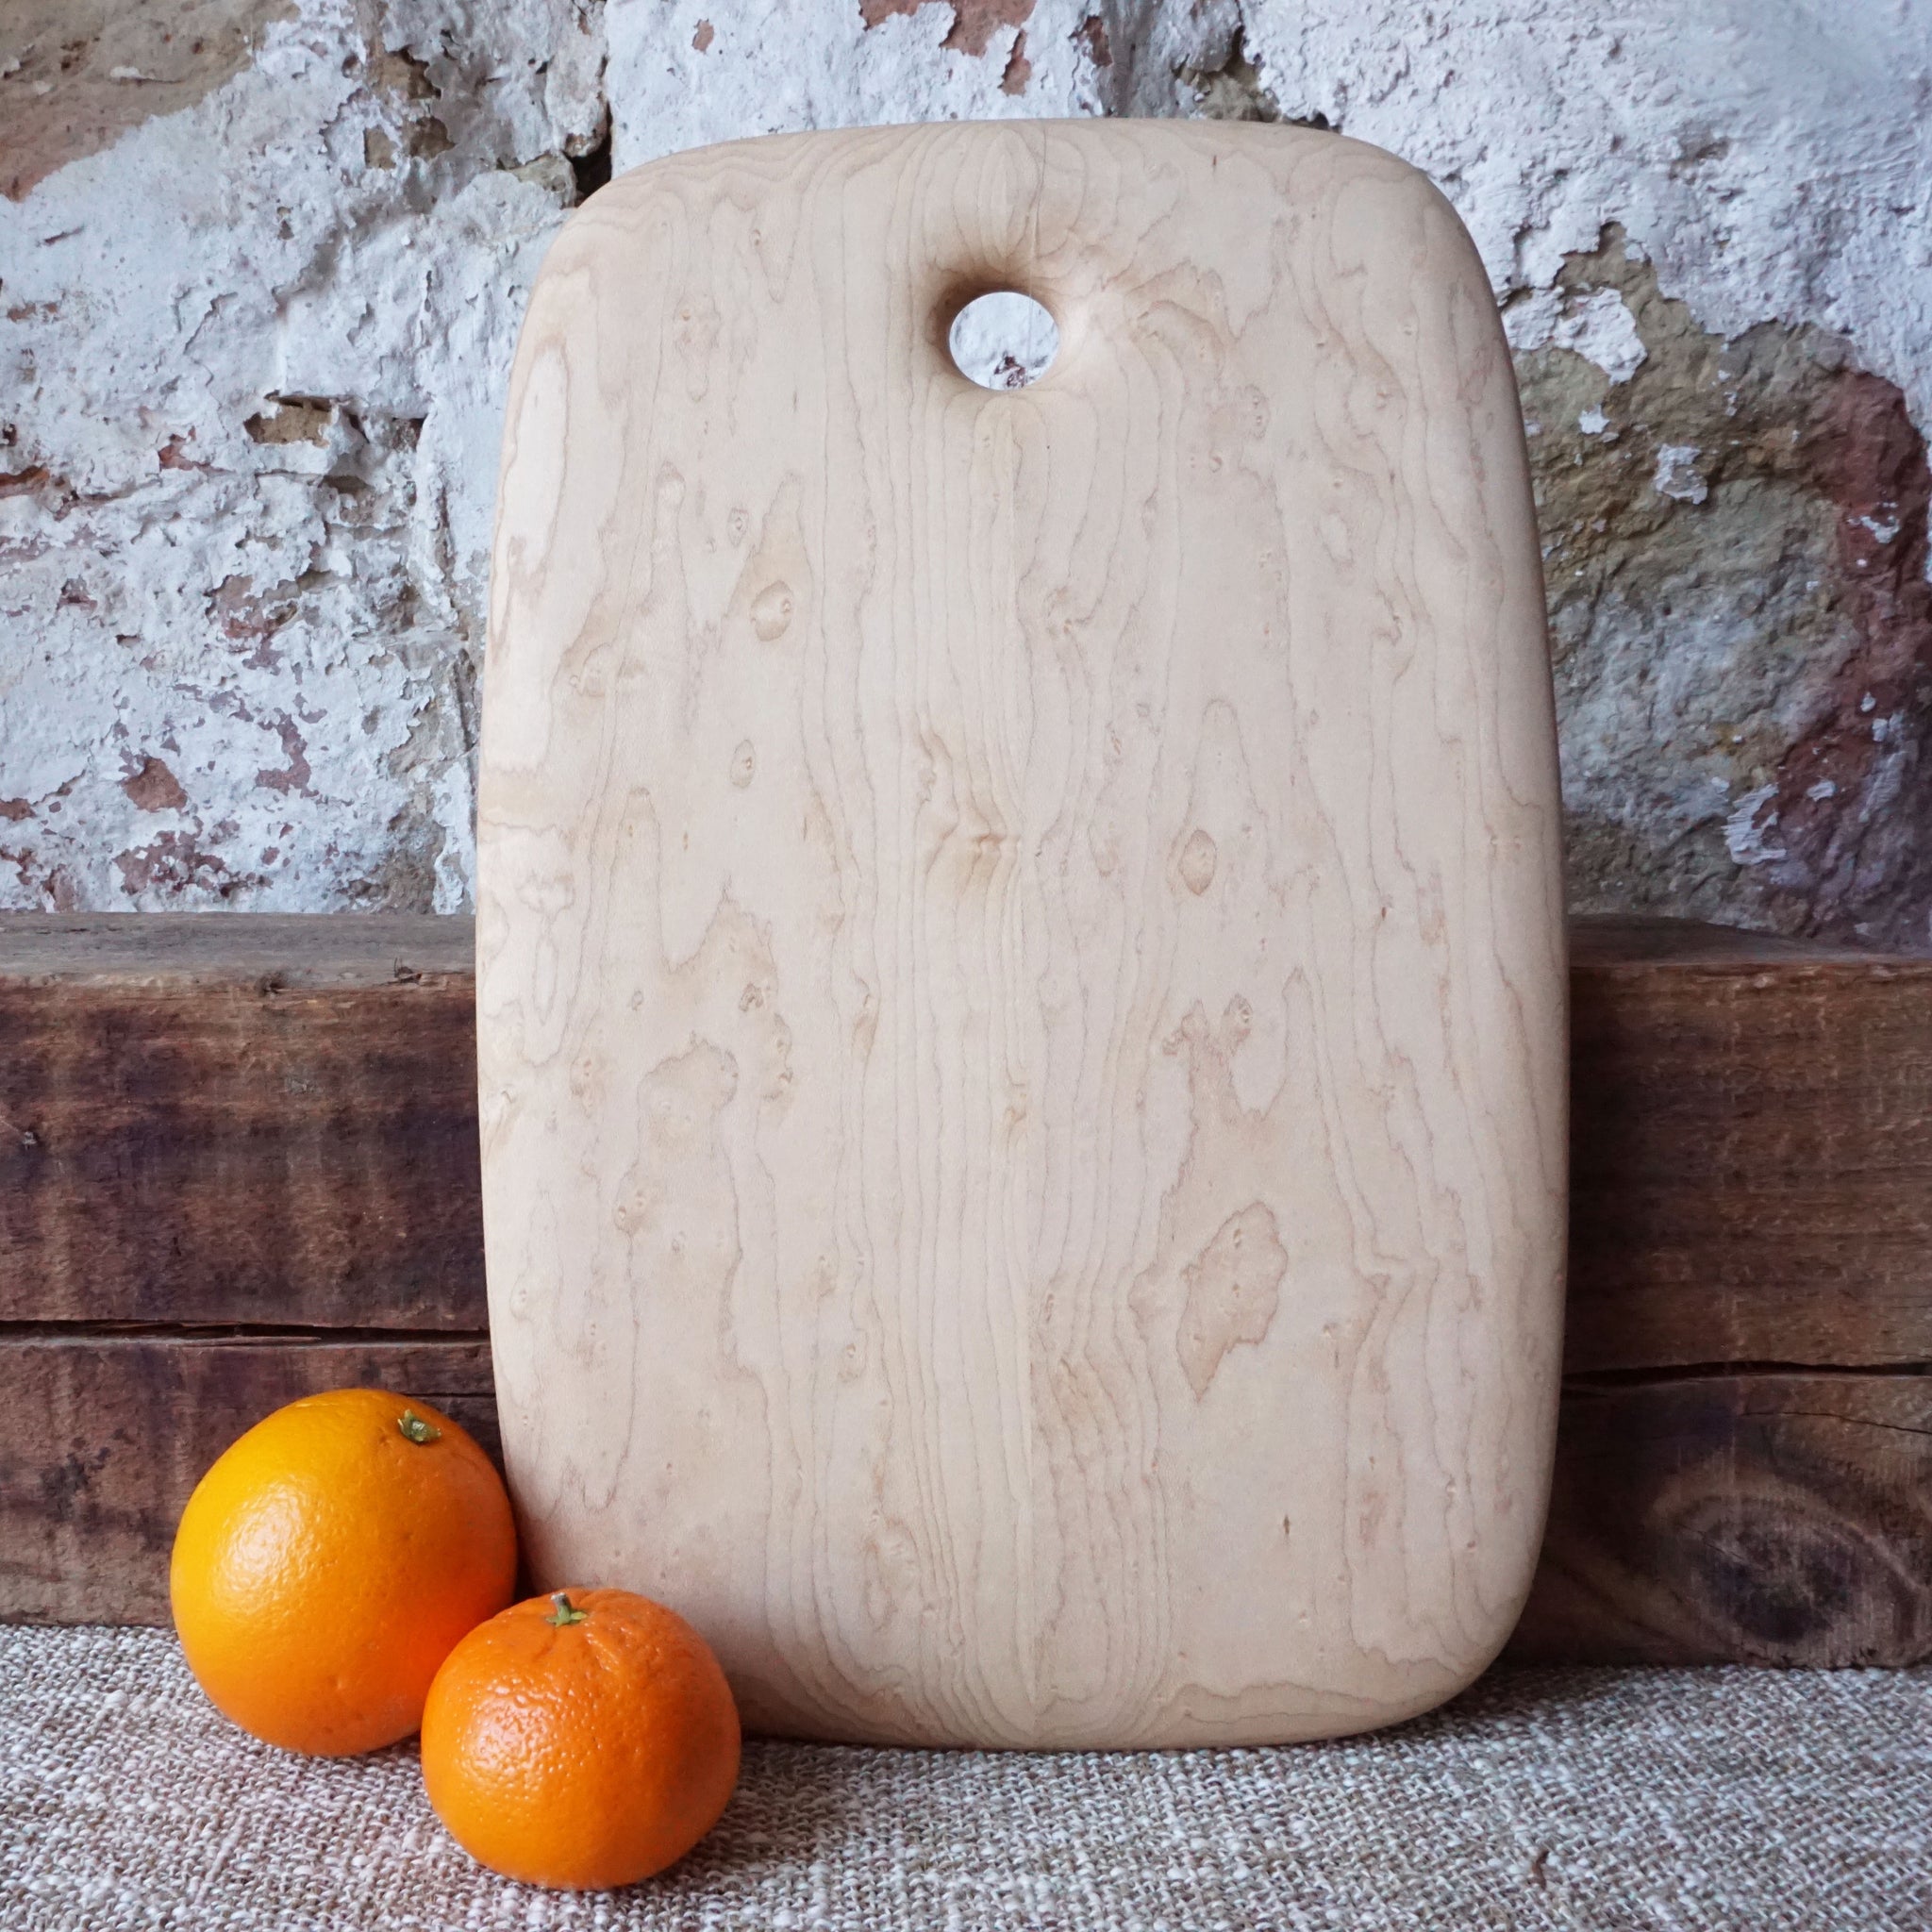 New Product Alert! Paper Cutting Boards!